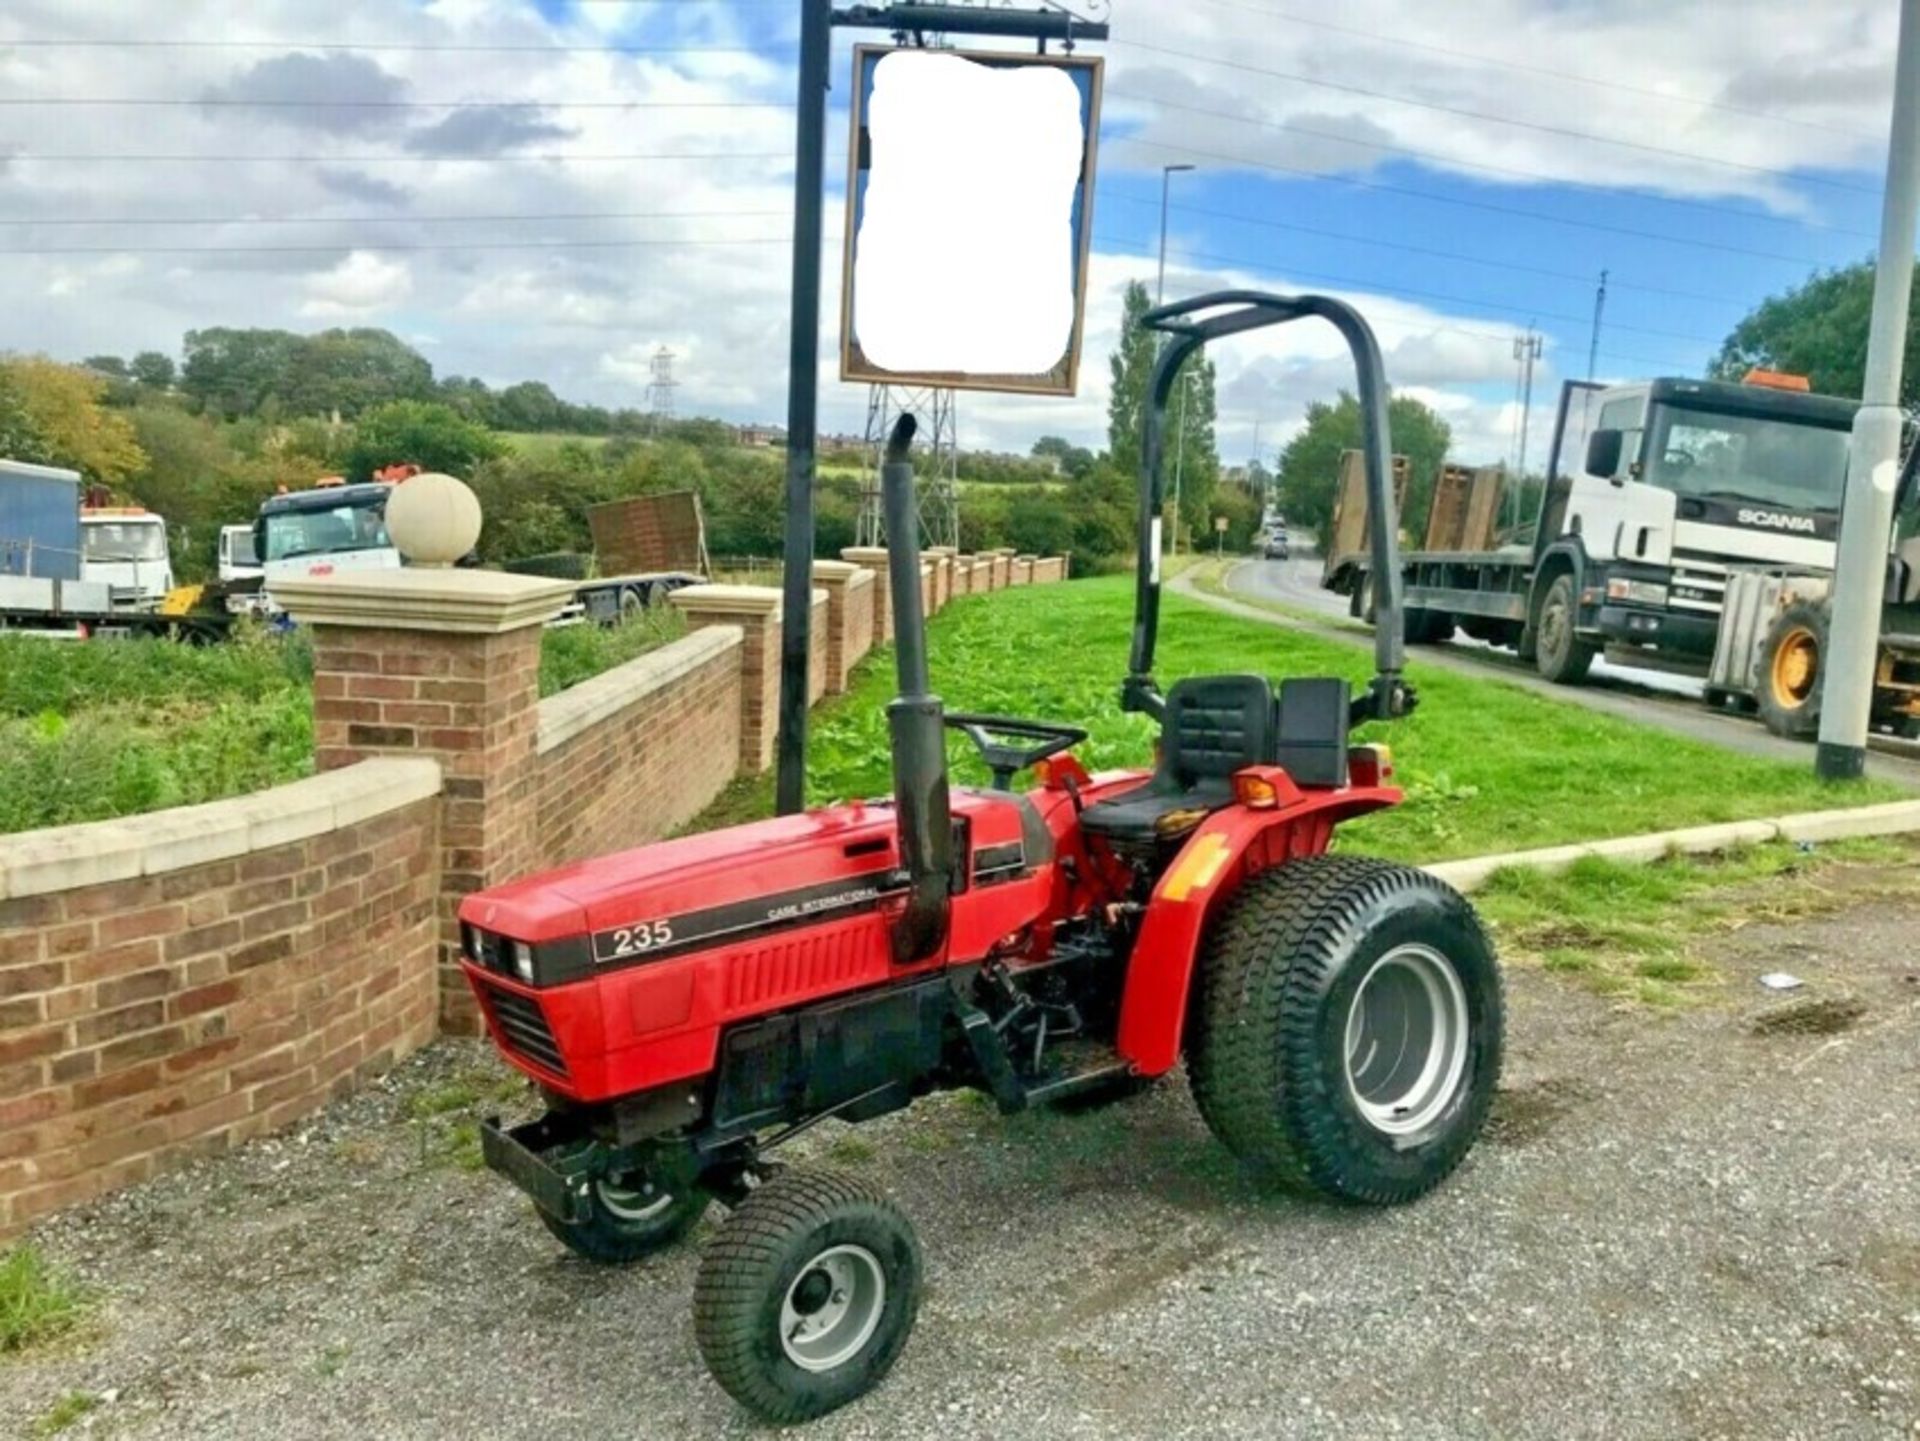 Case International 234 Compact Tractor